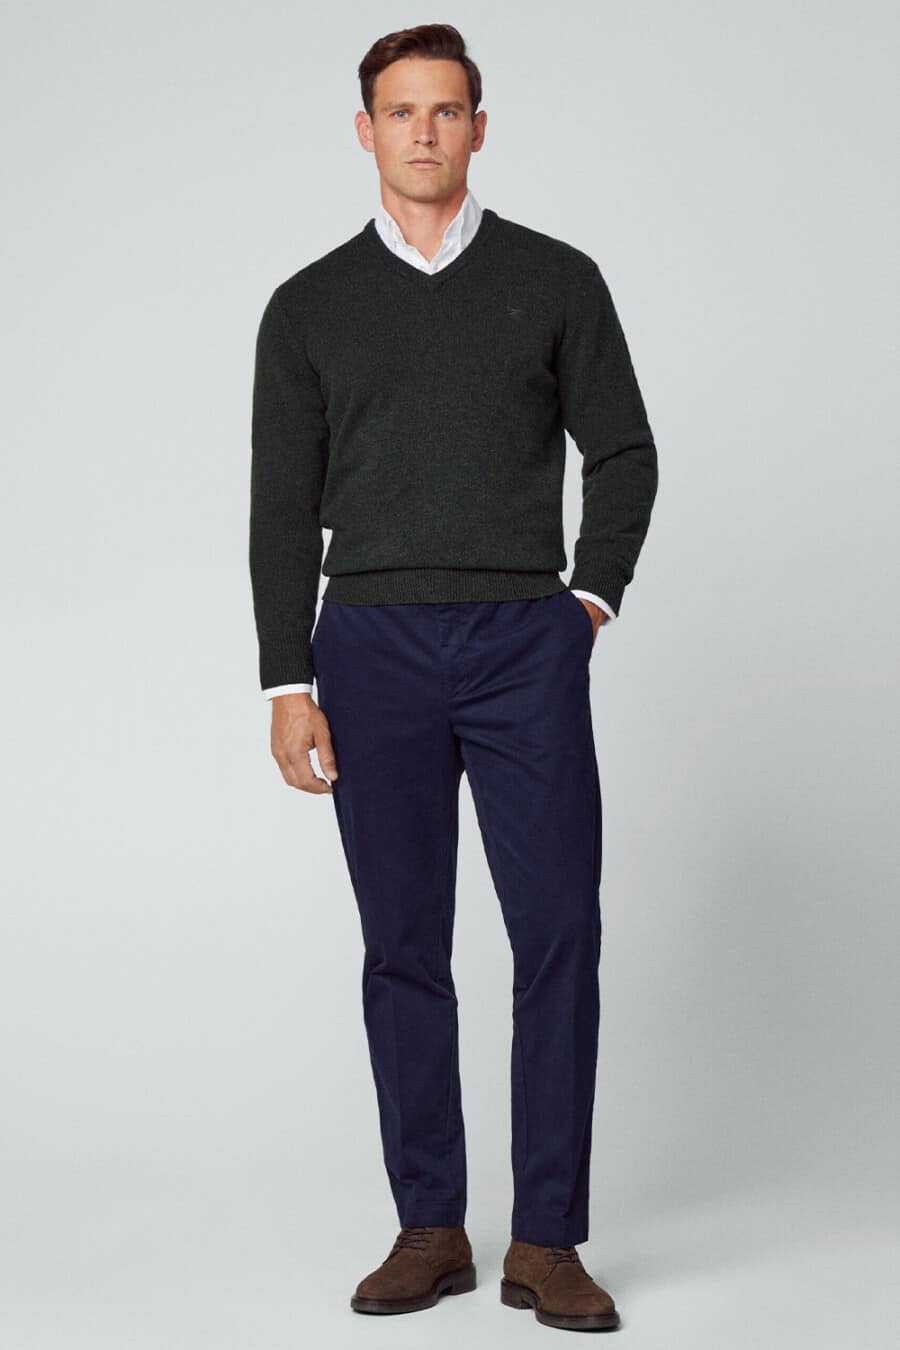 Men's navy chinos, white shirt, charcoal V-neck merino sweater and brown suede shoes outfit